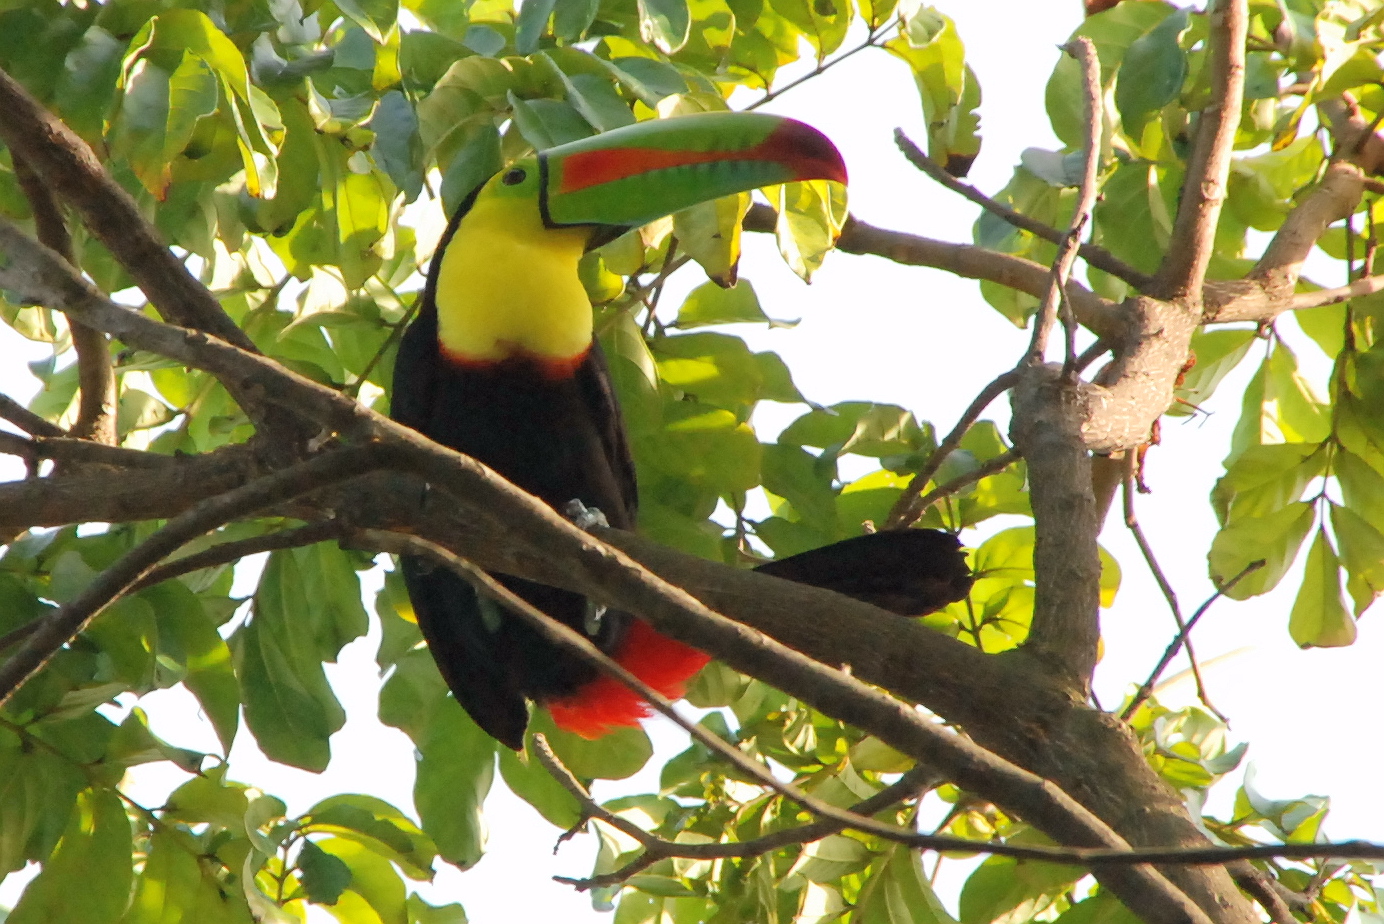 Click picture to see more Keel-billed Toucans.